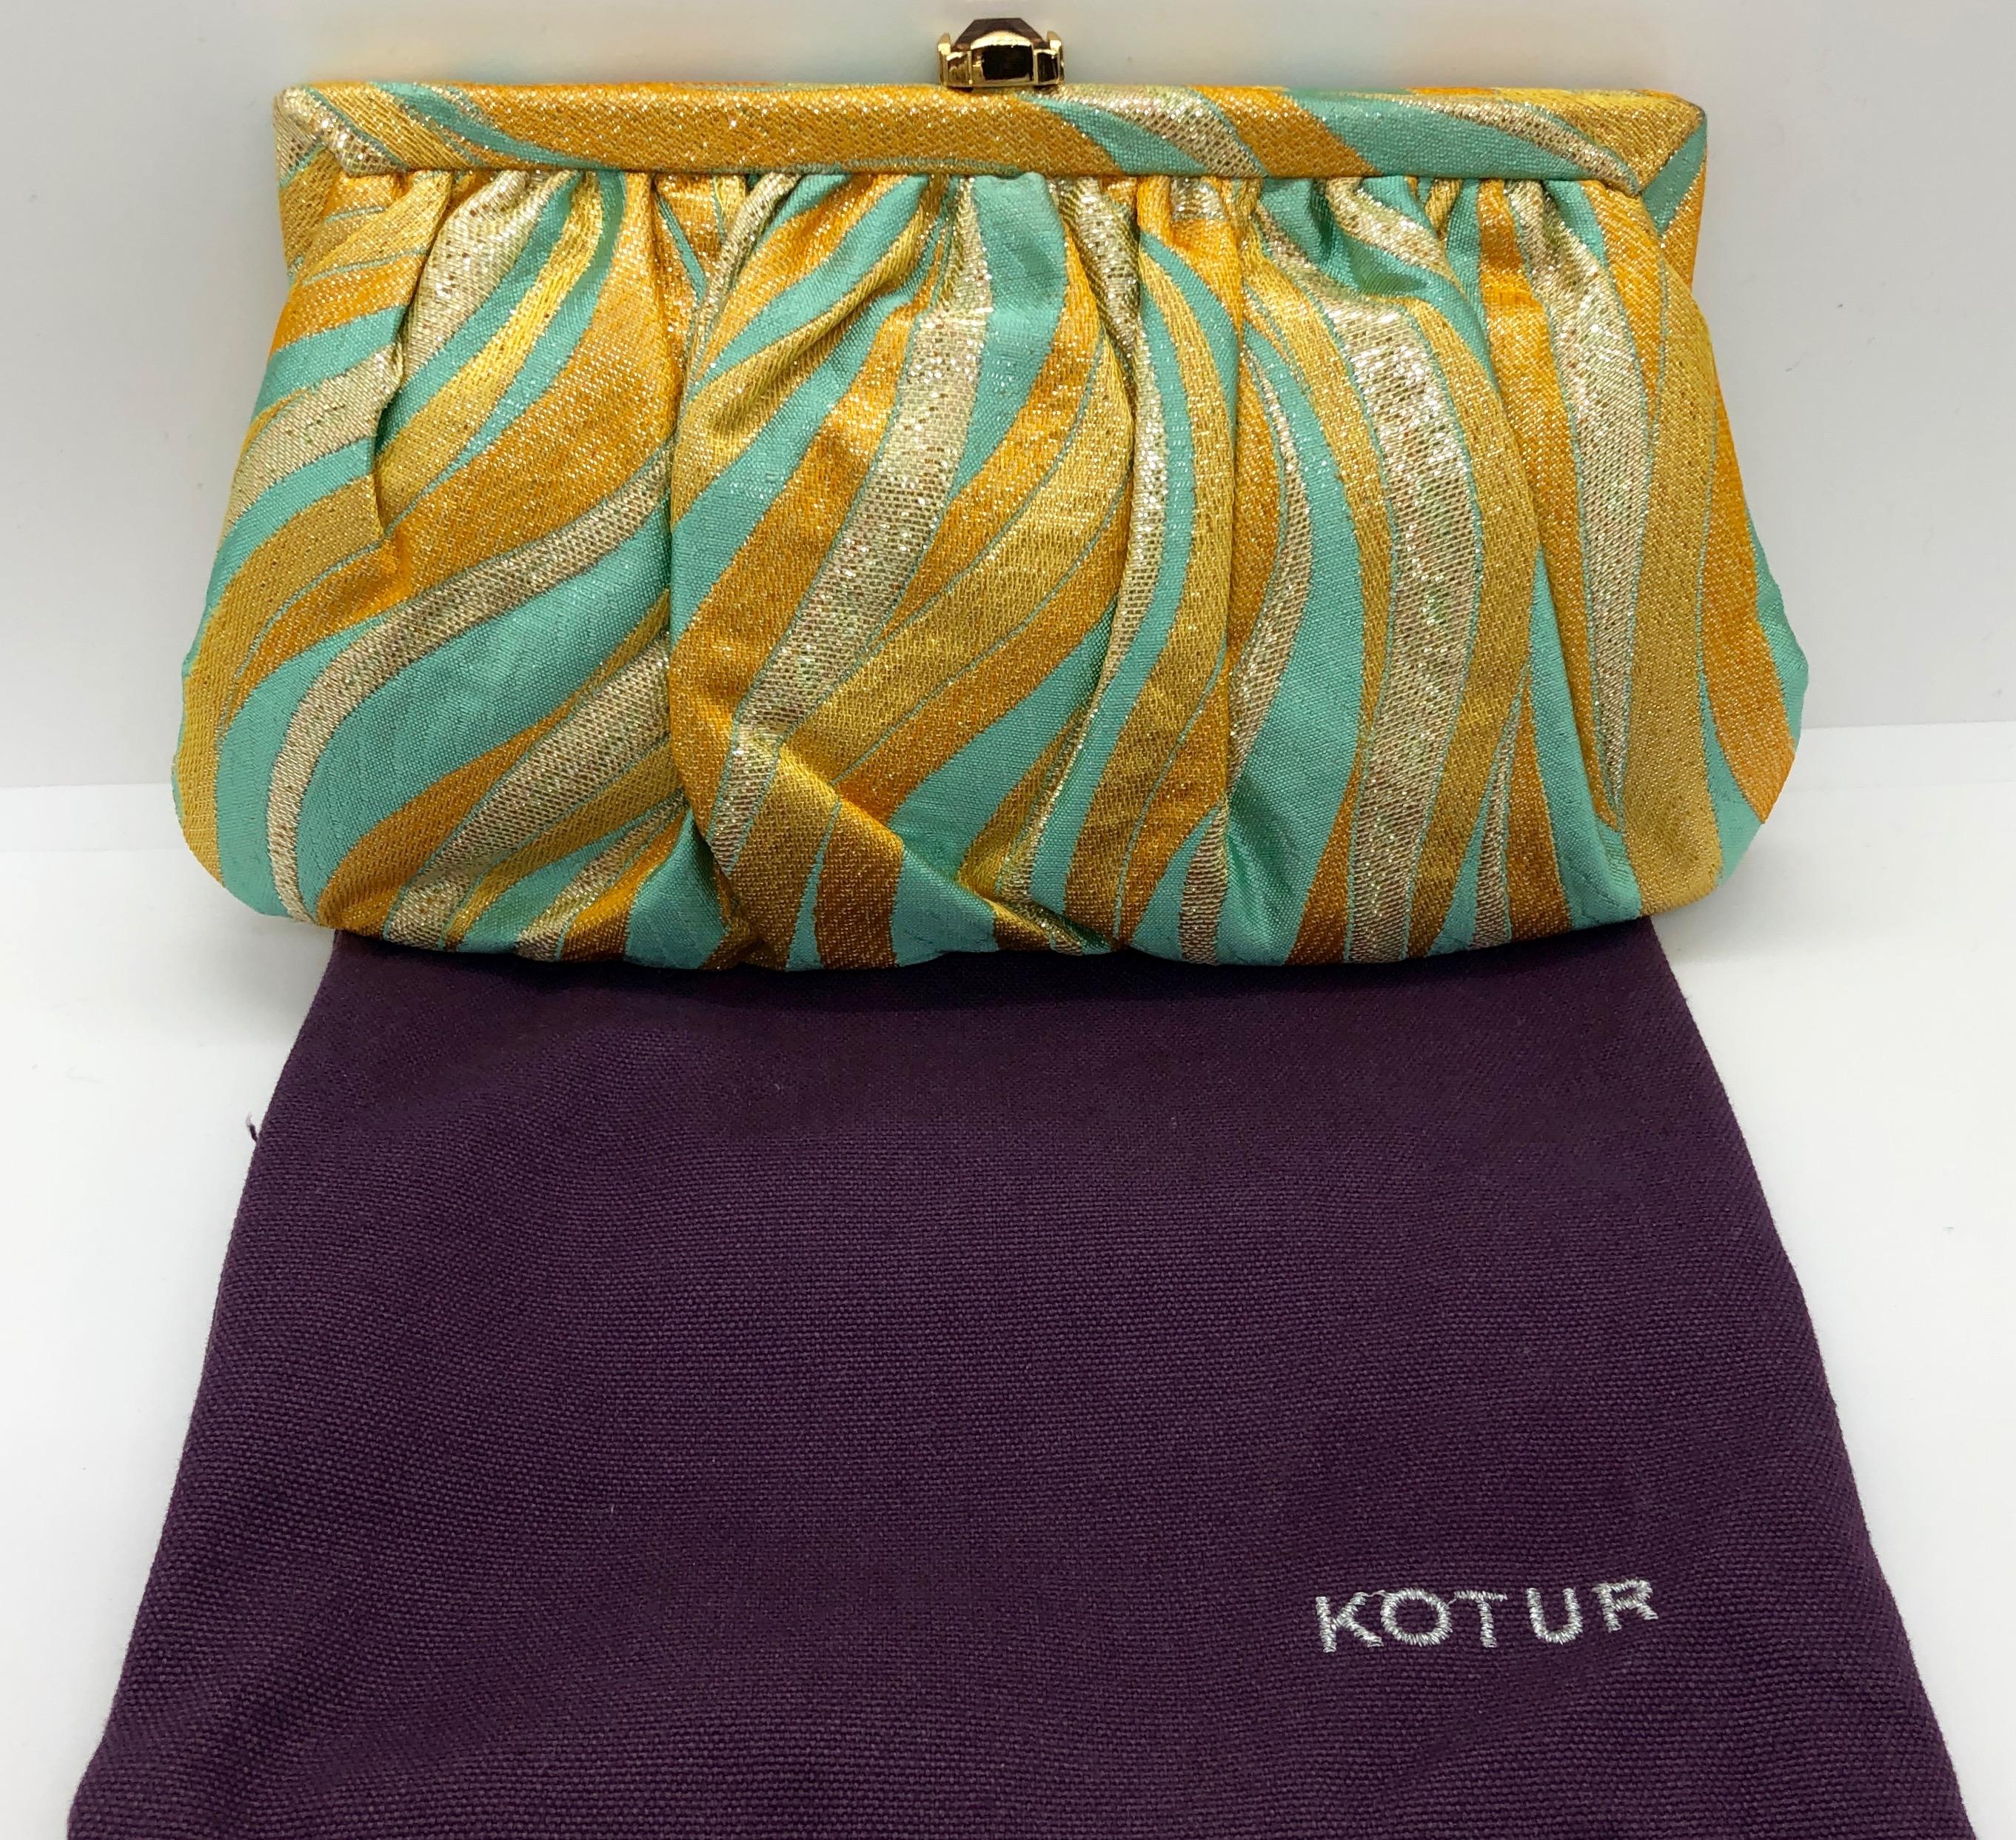 Kotur Metallic Yellow, Gold & Turquoise Silk w/ Gold Clasp & Chain Evening Bag For Sale 7